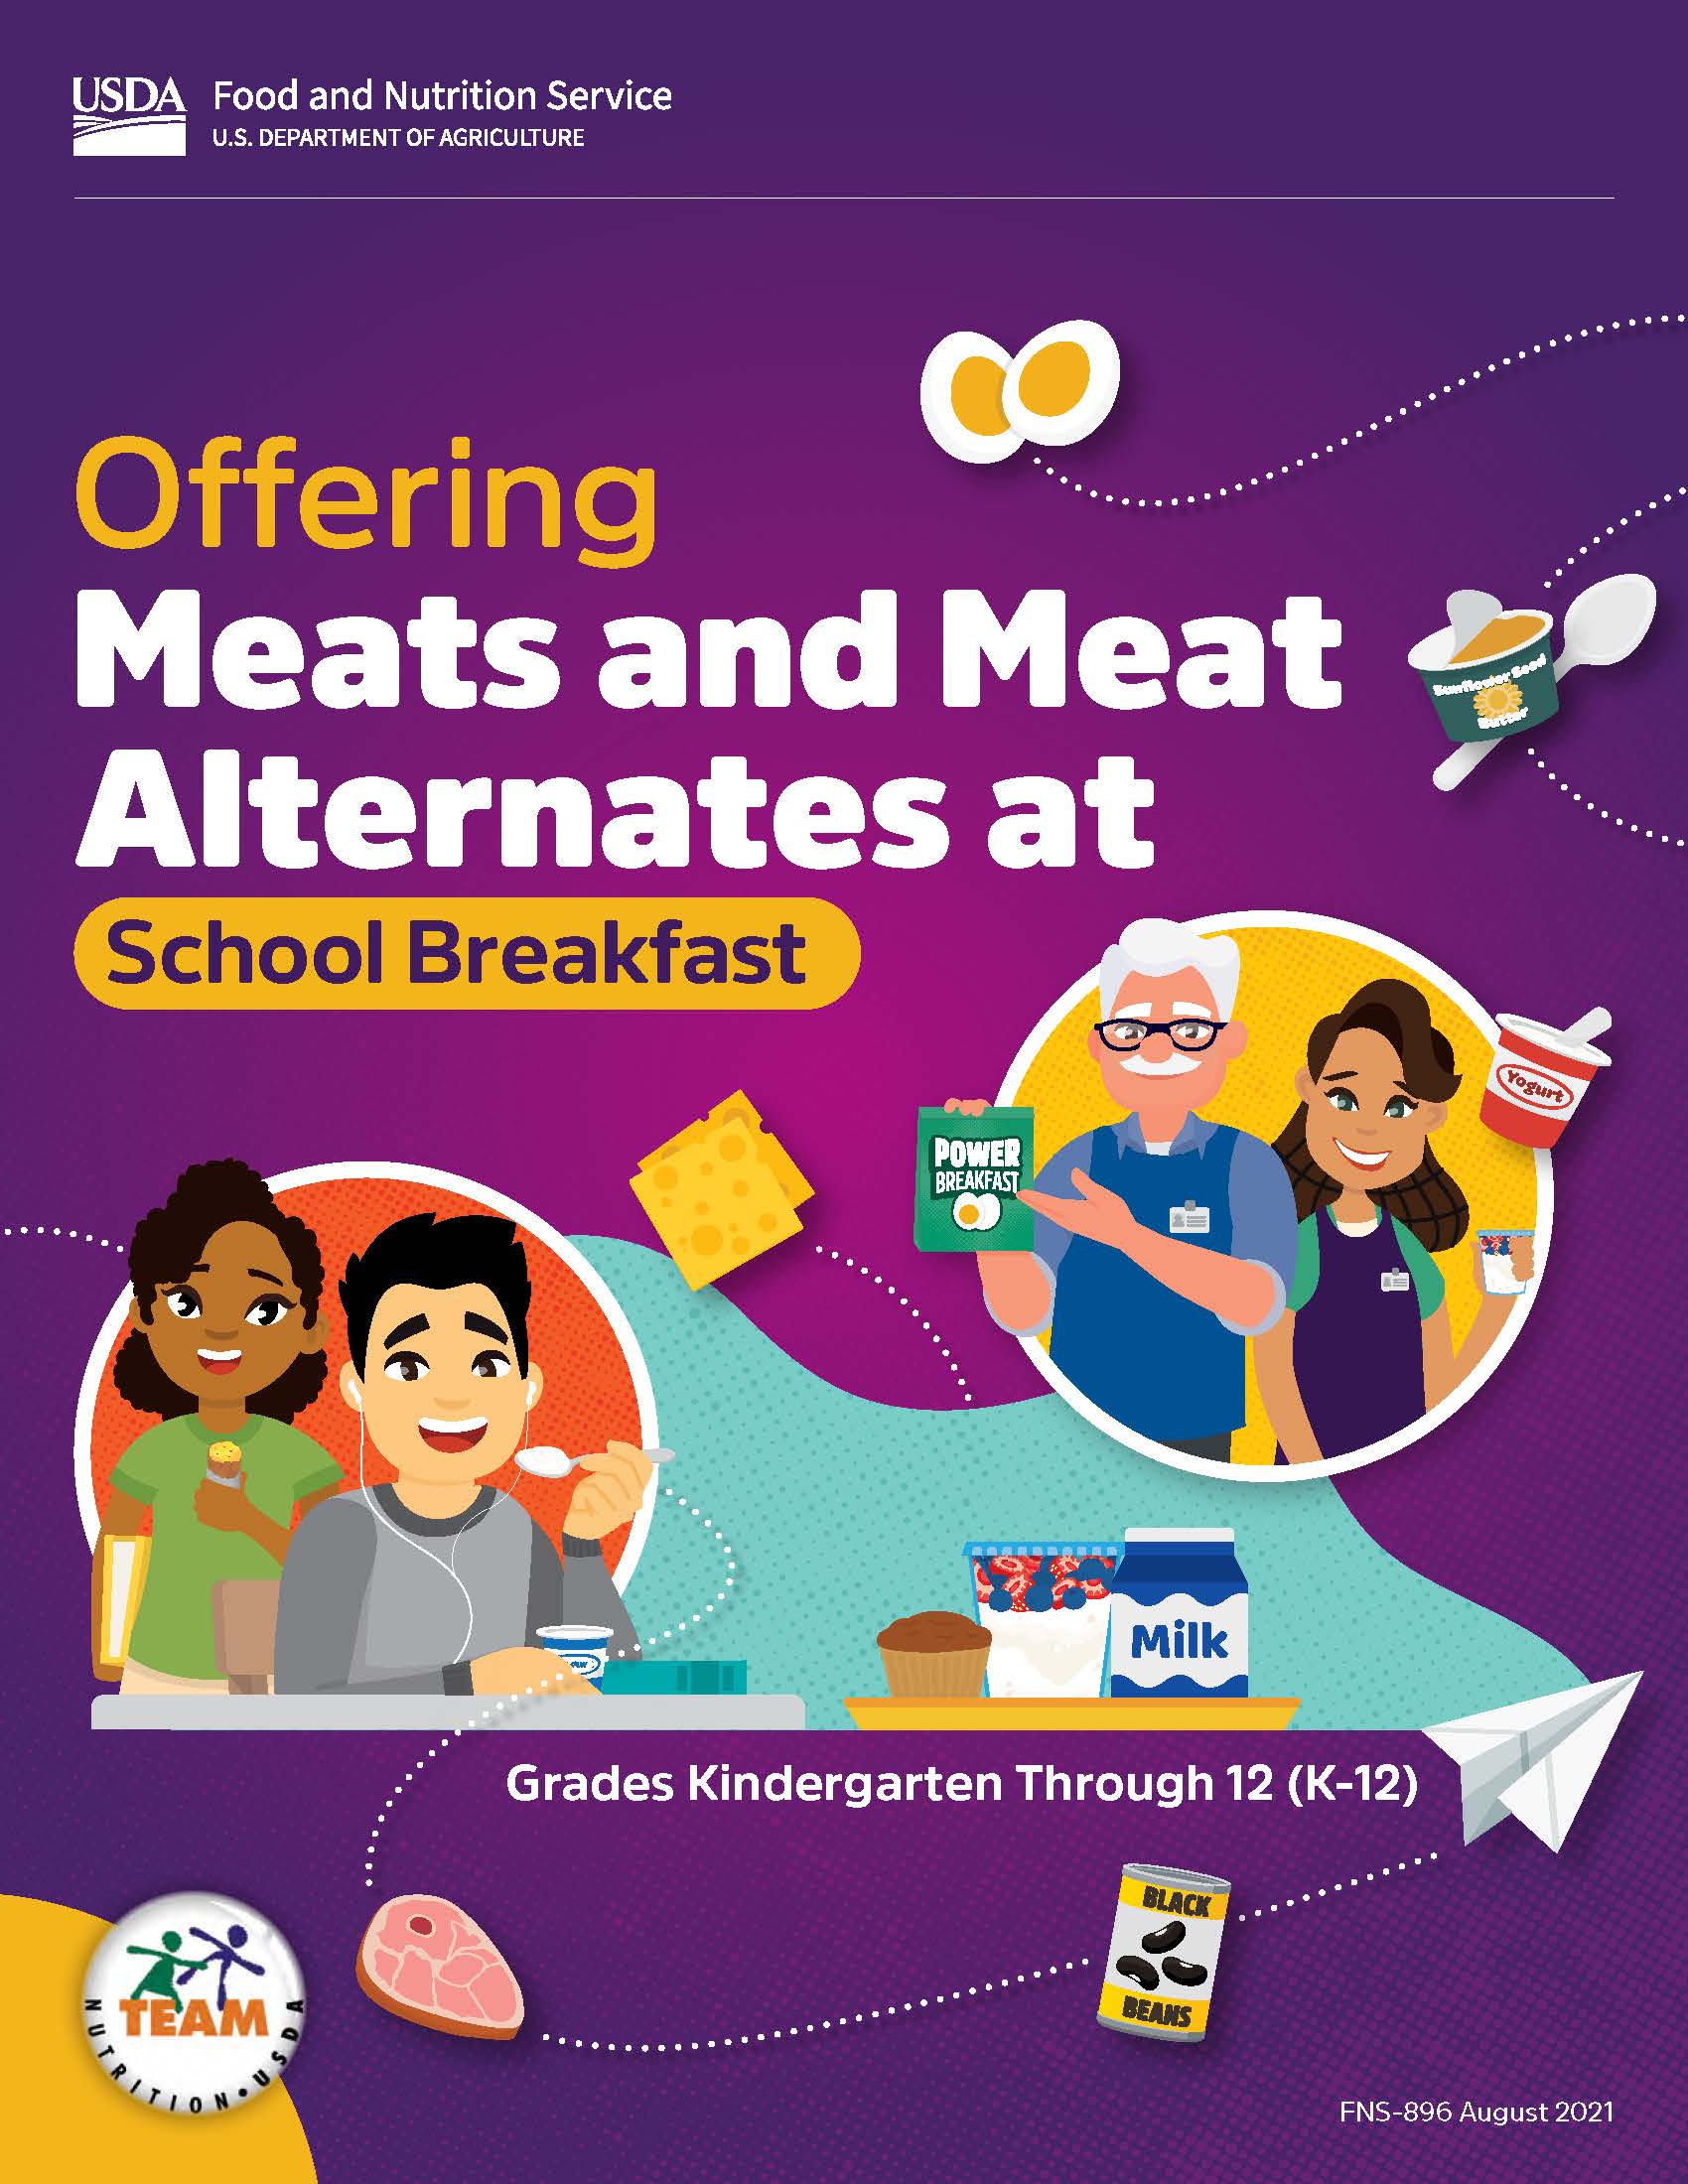 Offering Meats and Meat Alternates at School Breakfast